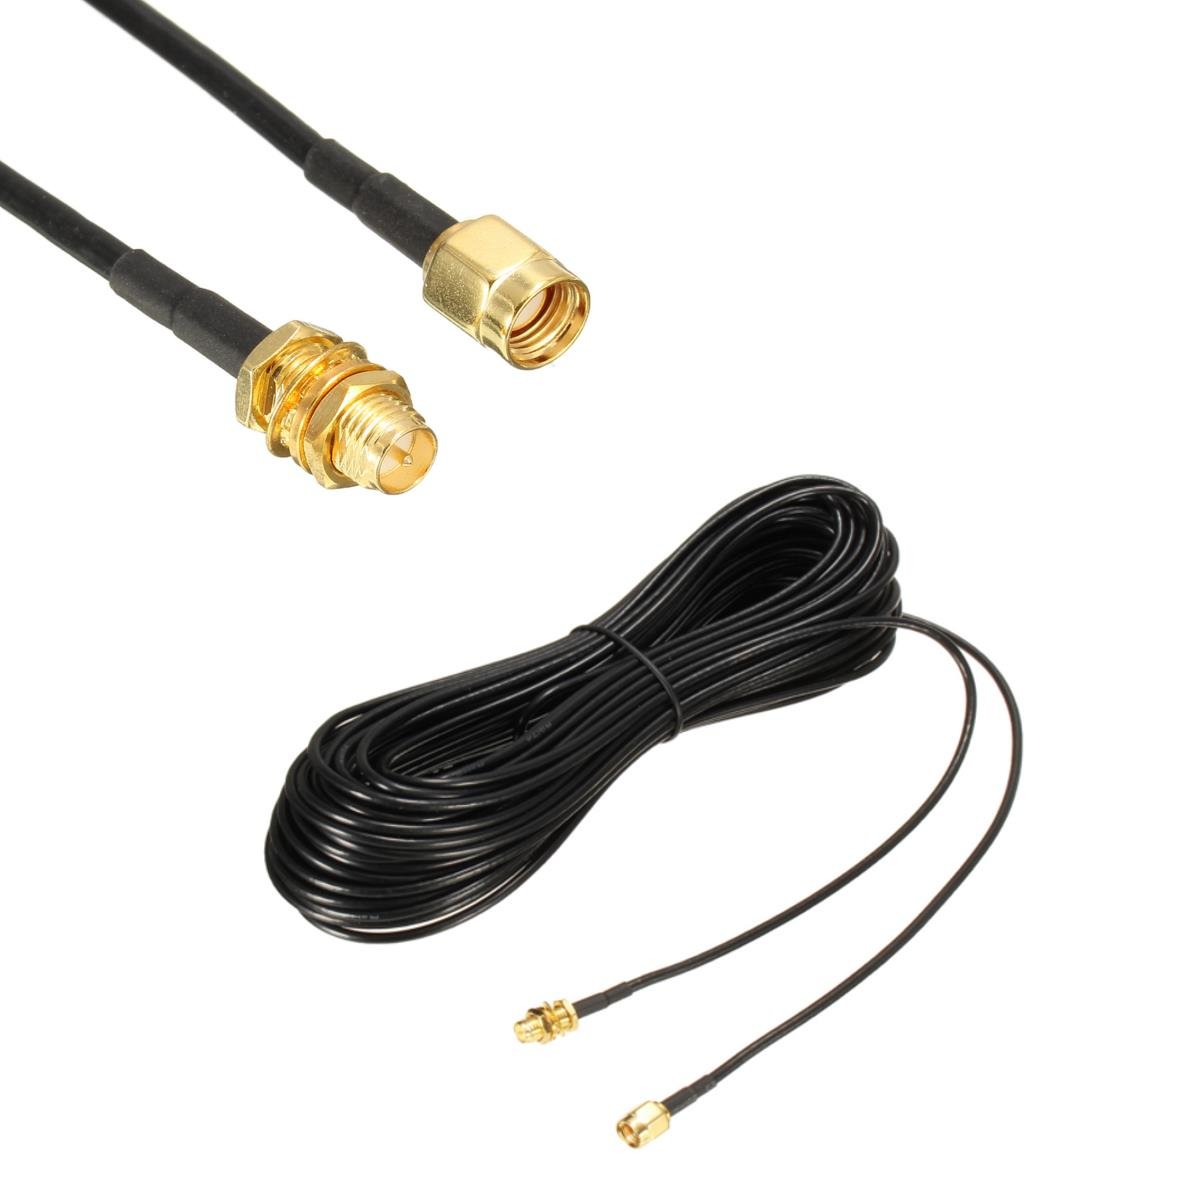 20CM/ 1M/ 5M/ 10M RP-SMA Male to Female Wireless Antenna Extension Cable 2